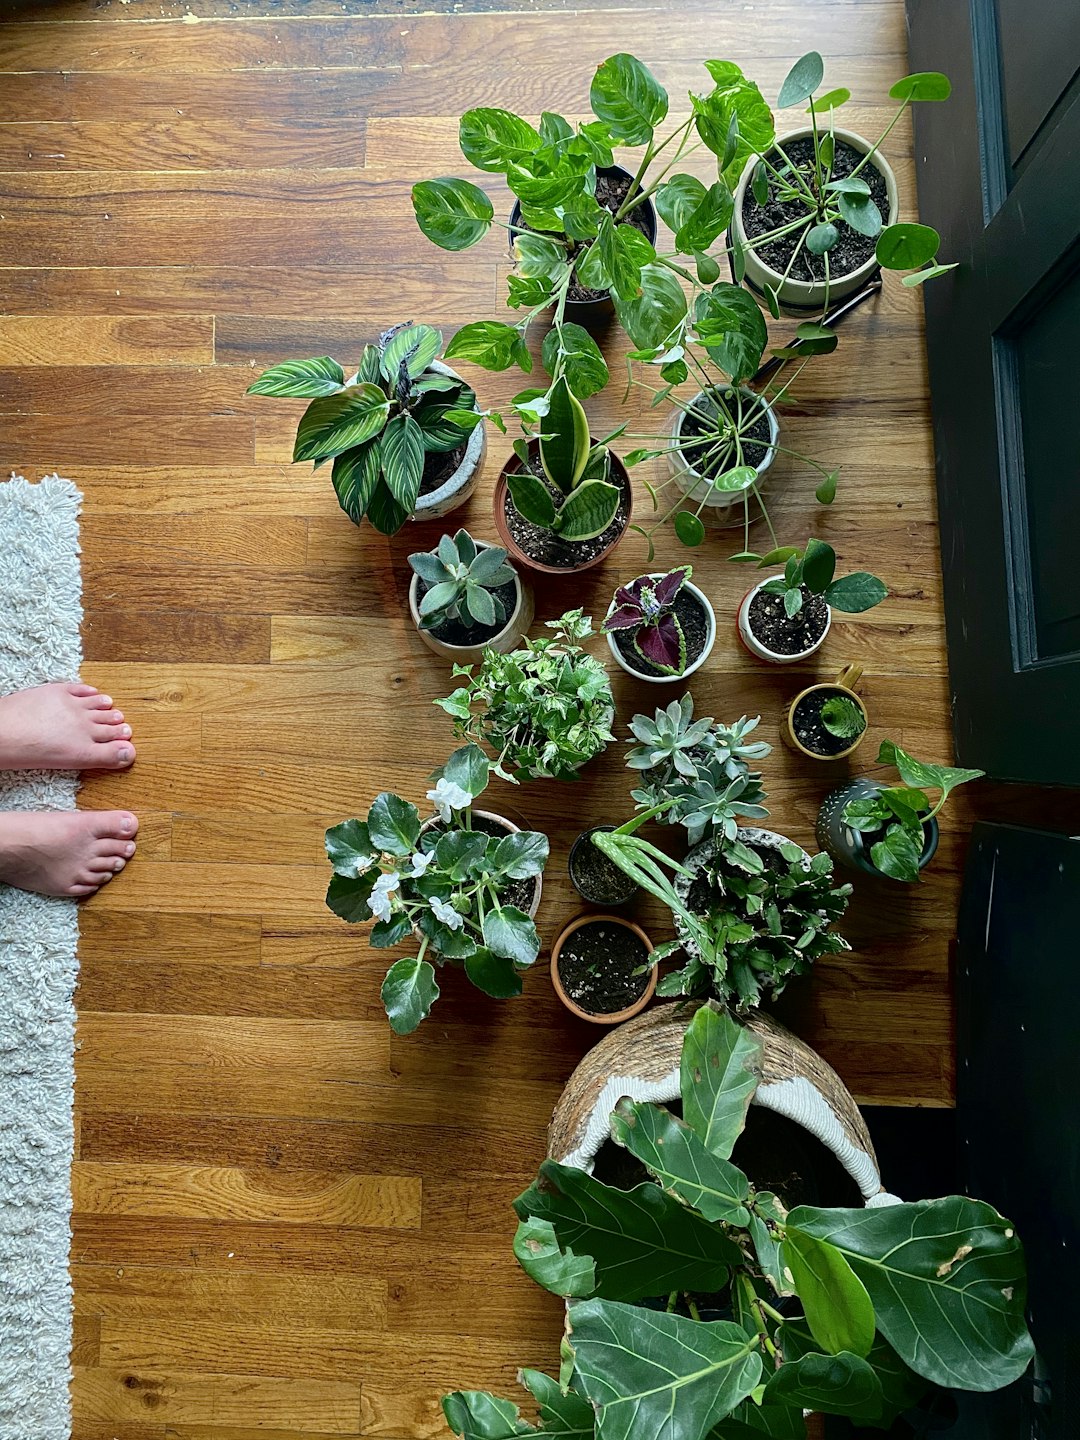 Discover Stress-Relief Through Houseplant Care and Gardening